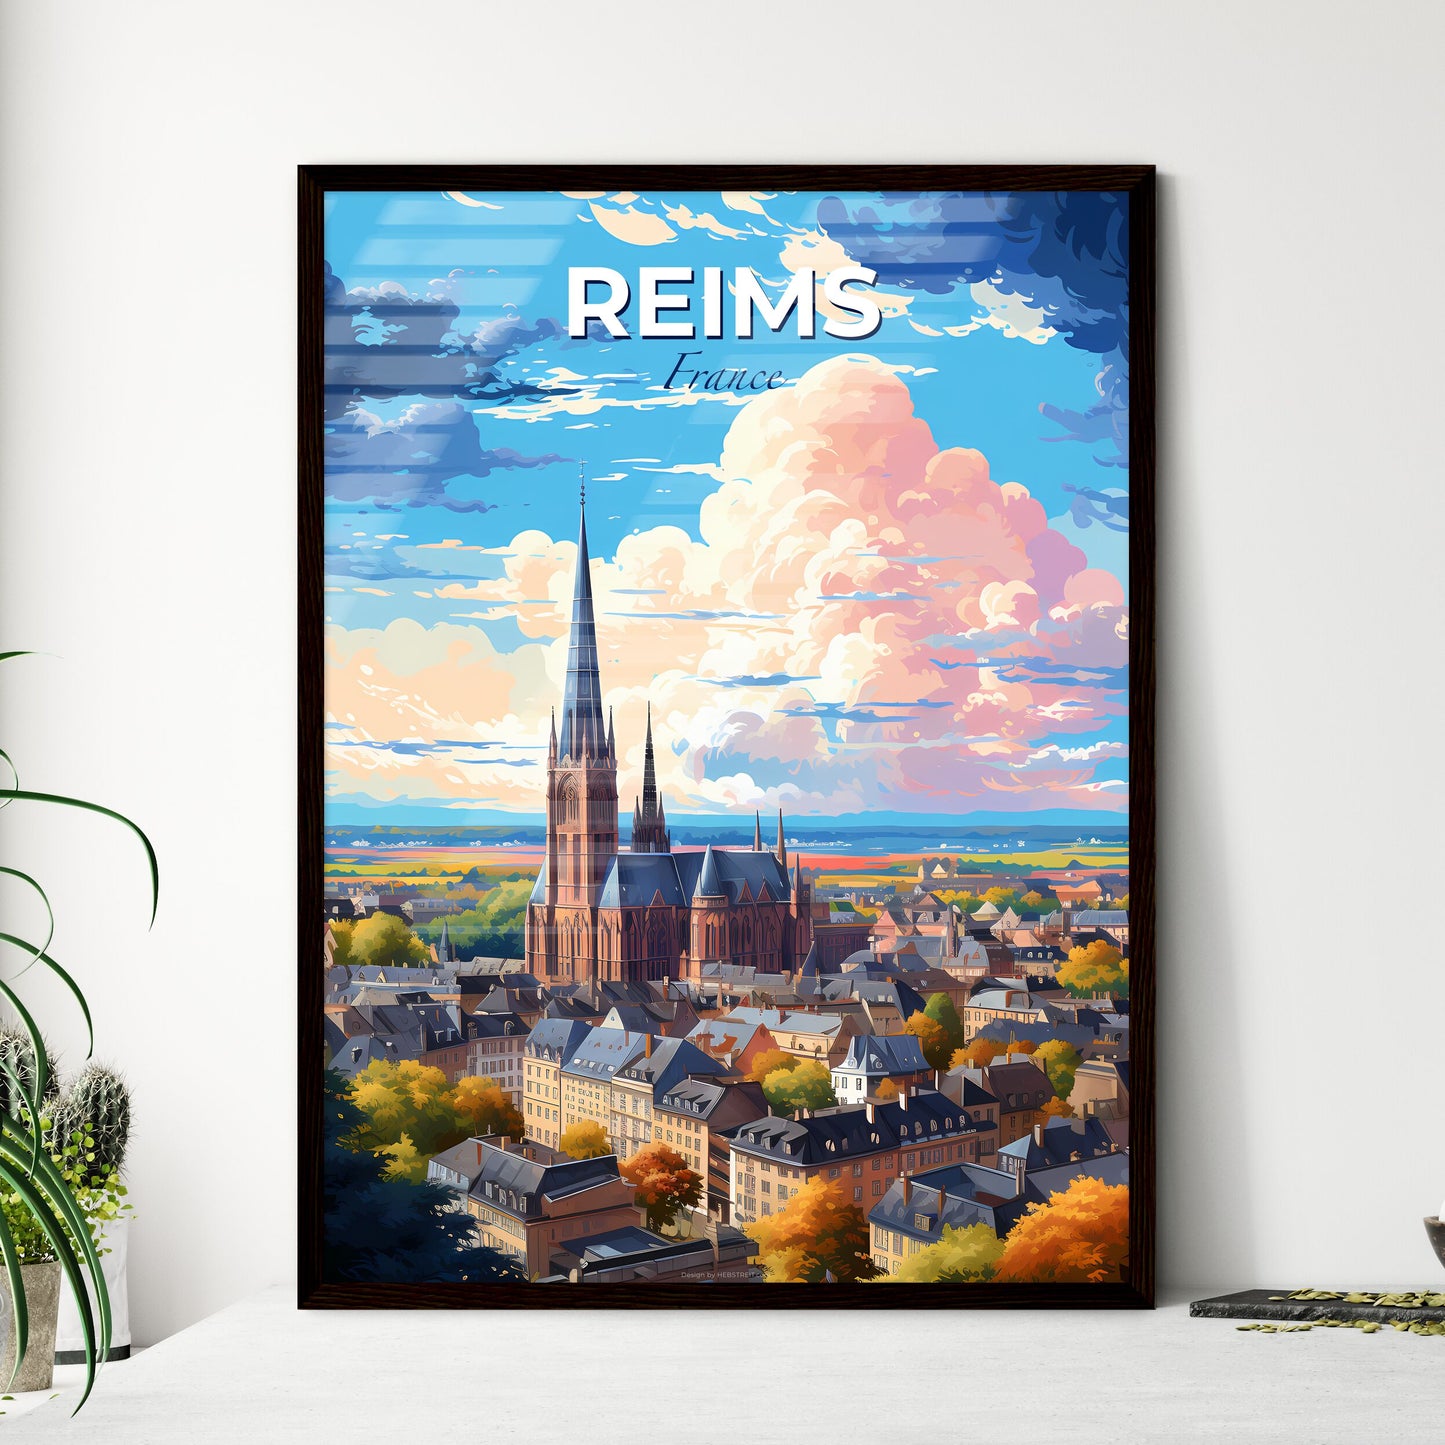 Reims France Skyline - A City With A Church And Trees - Customizable Travel Gift Default Title